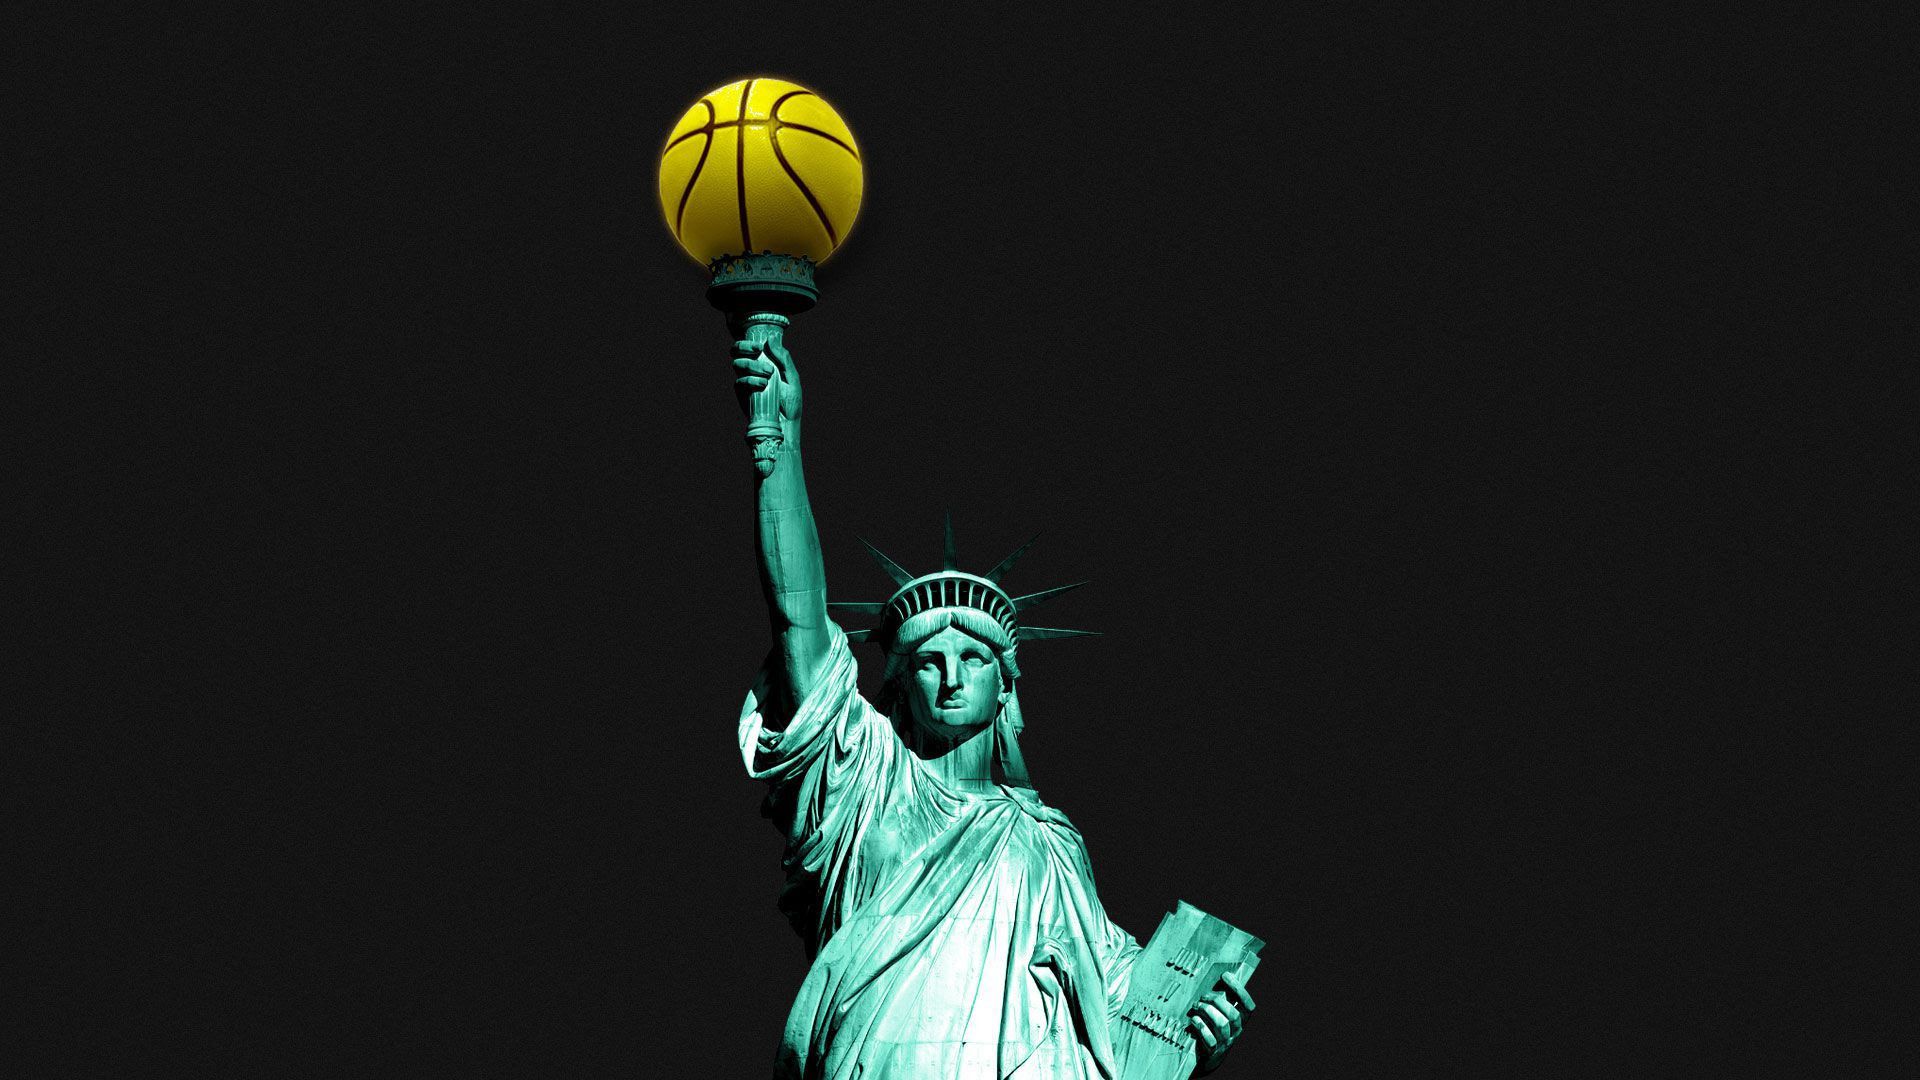 Illustration of the Statue of Liberty with a basketball